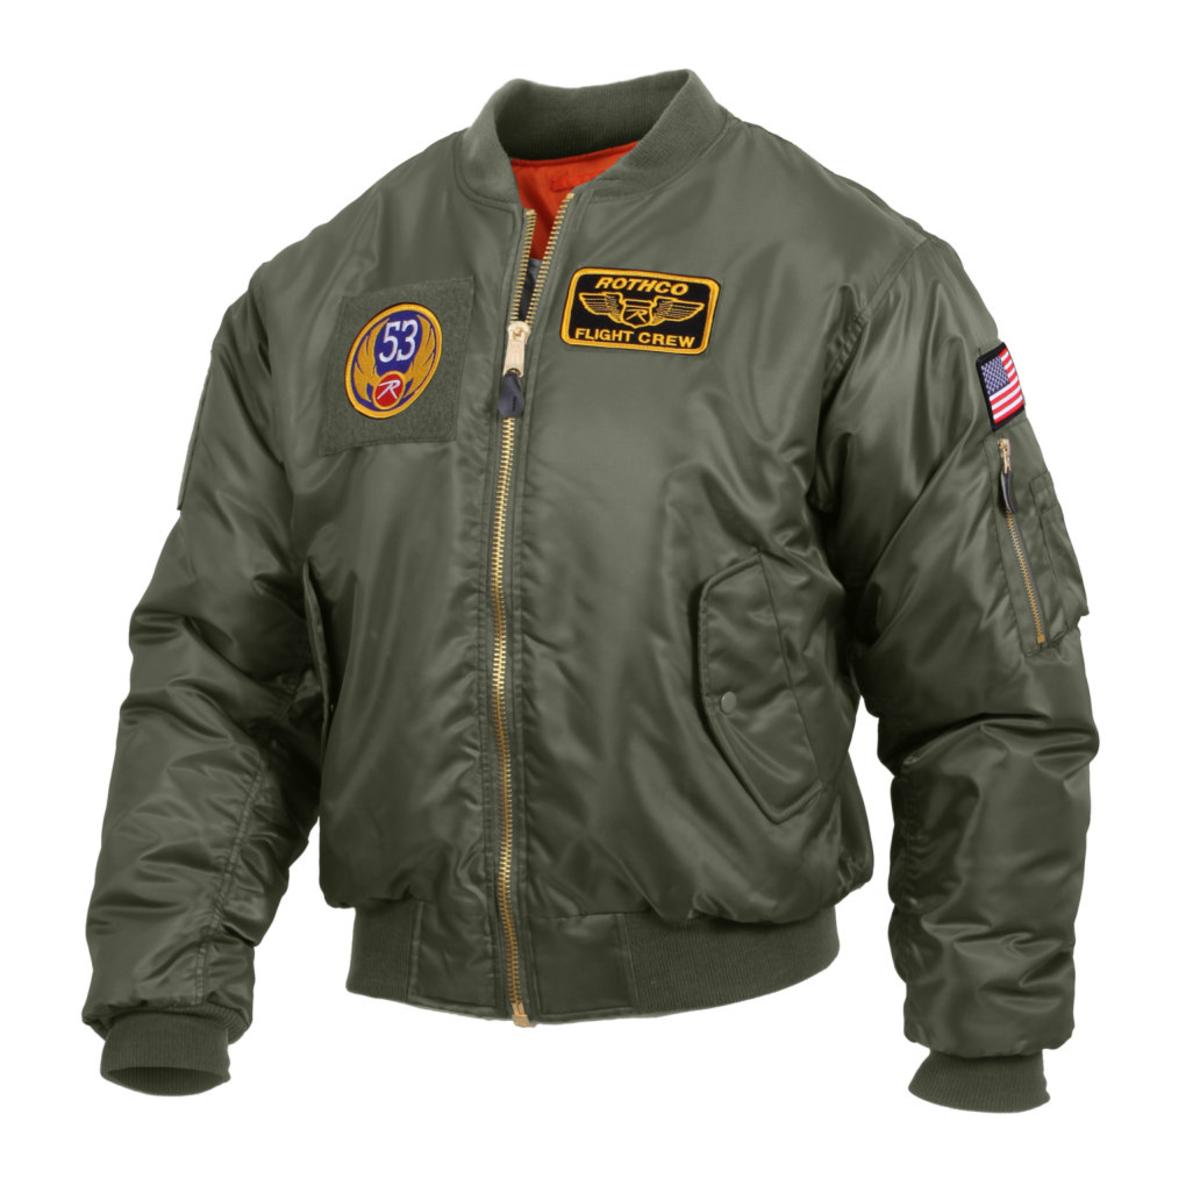 Rothco MA-1 Flight Jacket with 5 Removable Morale Patches | eBay